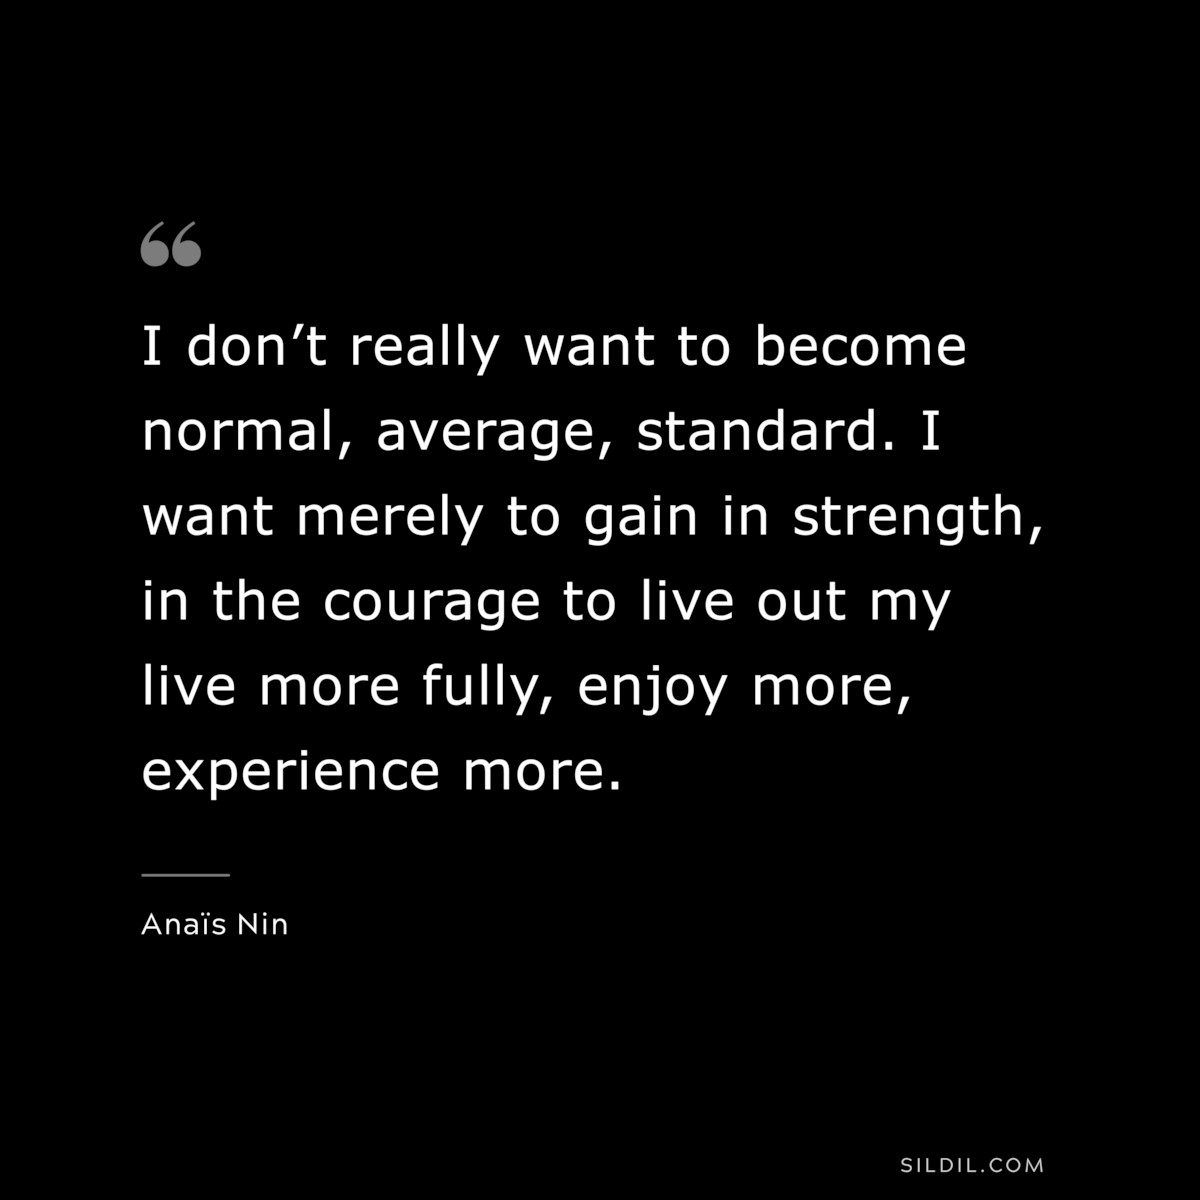 I don’t really want to become normal, average, standard. I want merely to gain in strength, in the courage to live out my live more fully, enjoy more, experience more. ― Anaïs Nin